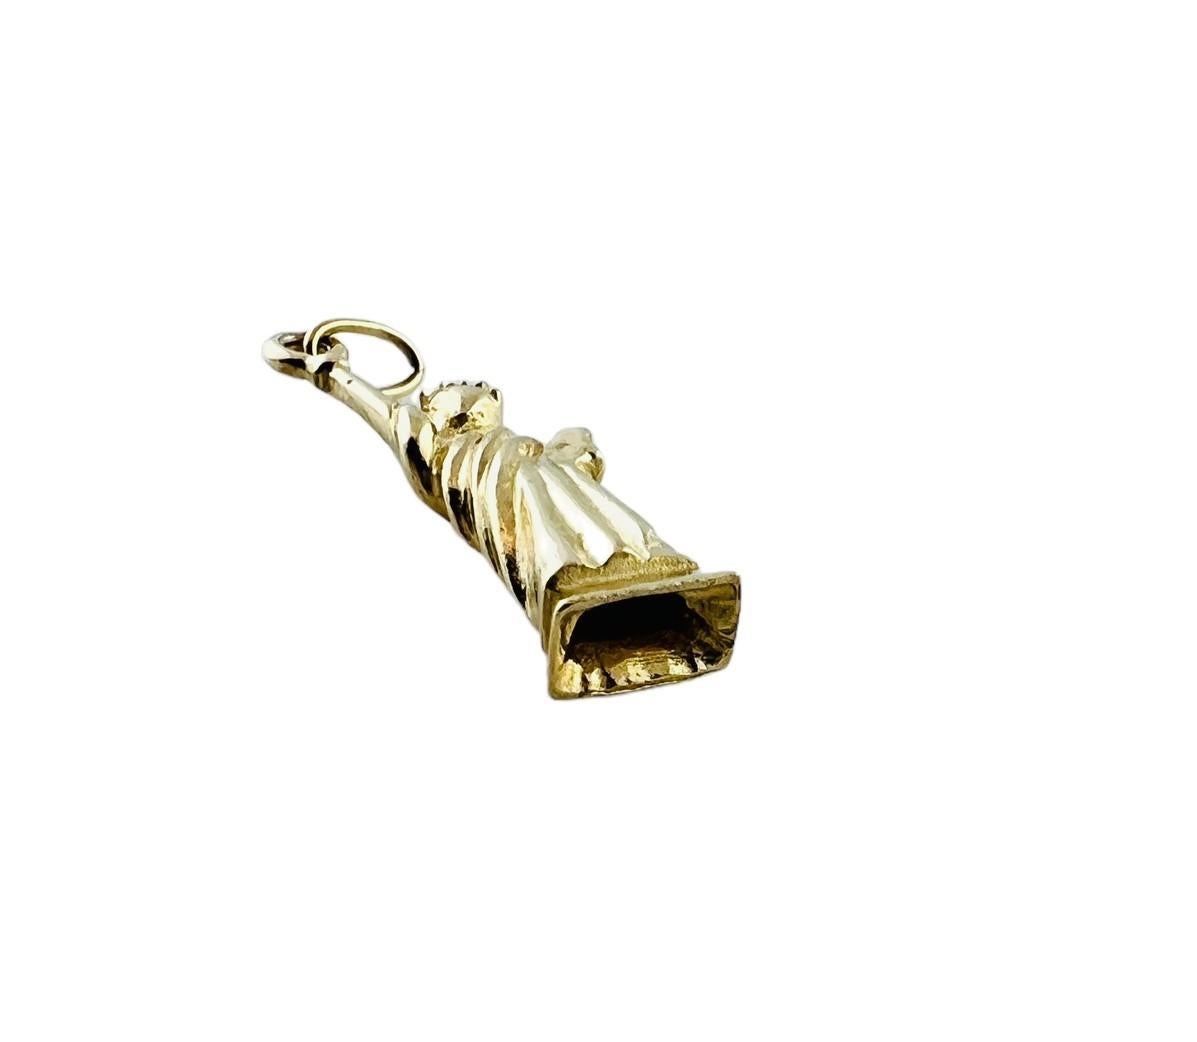 14K Yellow Gold Statue of Liberty Charm Pendant

This Statue of Liberty charm is set in 14K yellow gold

Charm measures approx. 23.0 x 6.4 x 3.7 mm

1.8 grams / 1.1 dwt

Acid tested for 14K

*Does not come with chain*

Very good preowned condition.